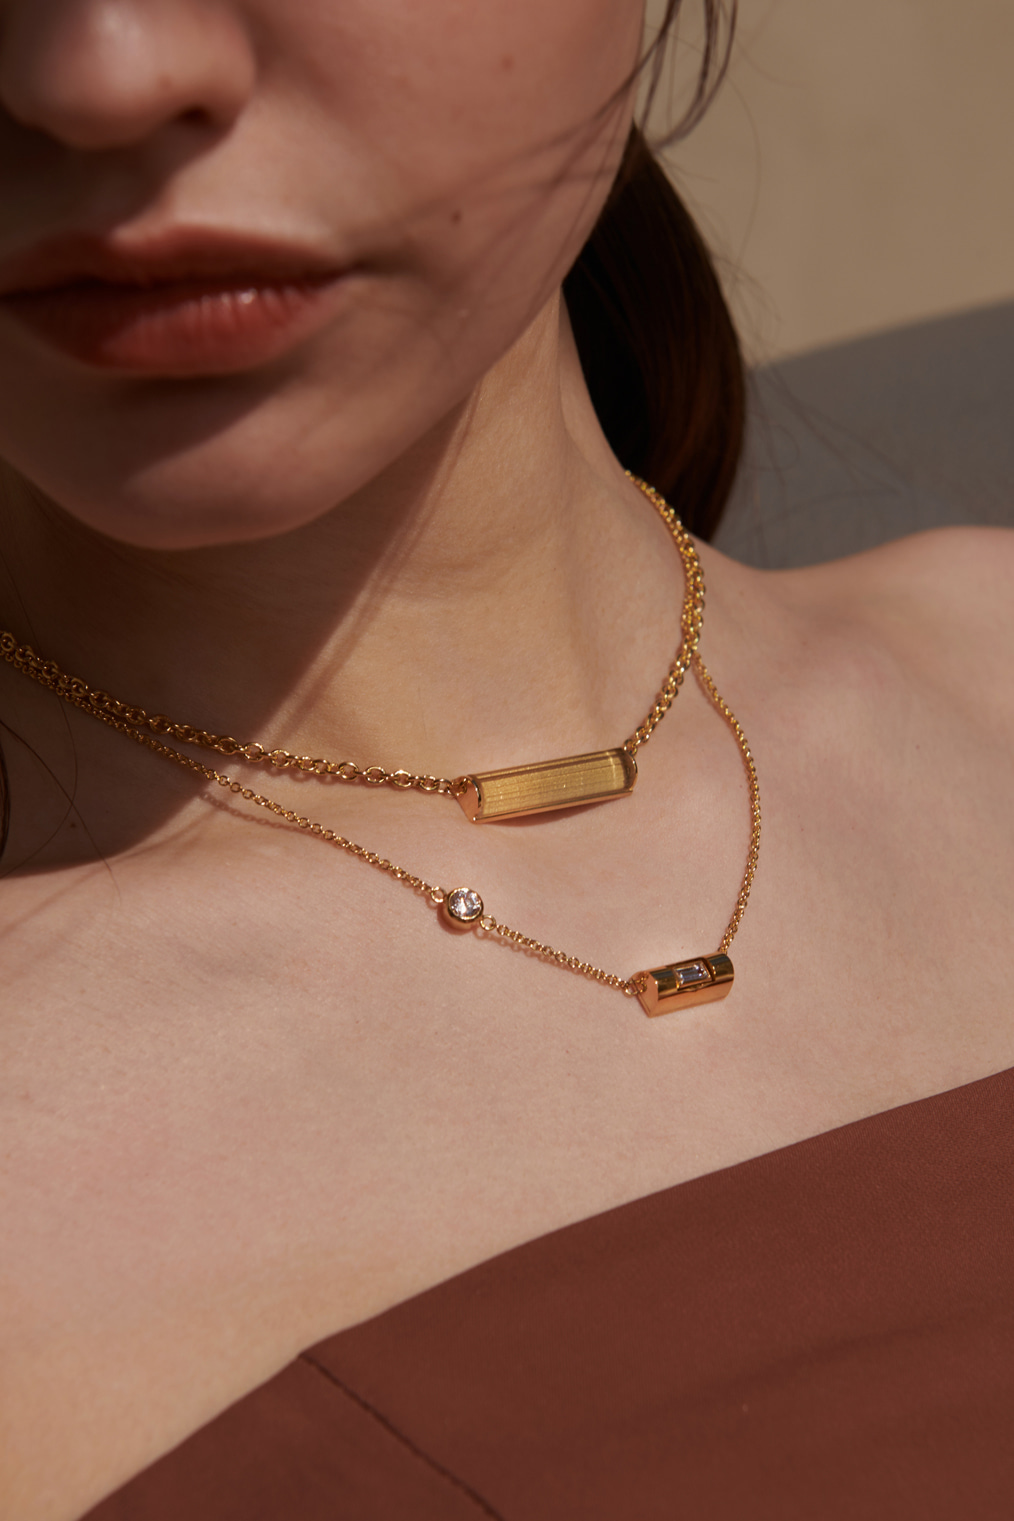 [NEW] Arch Object Necklace